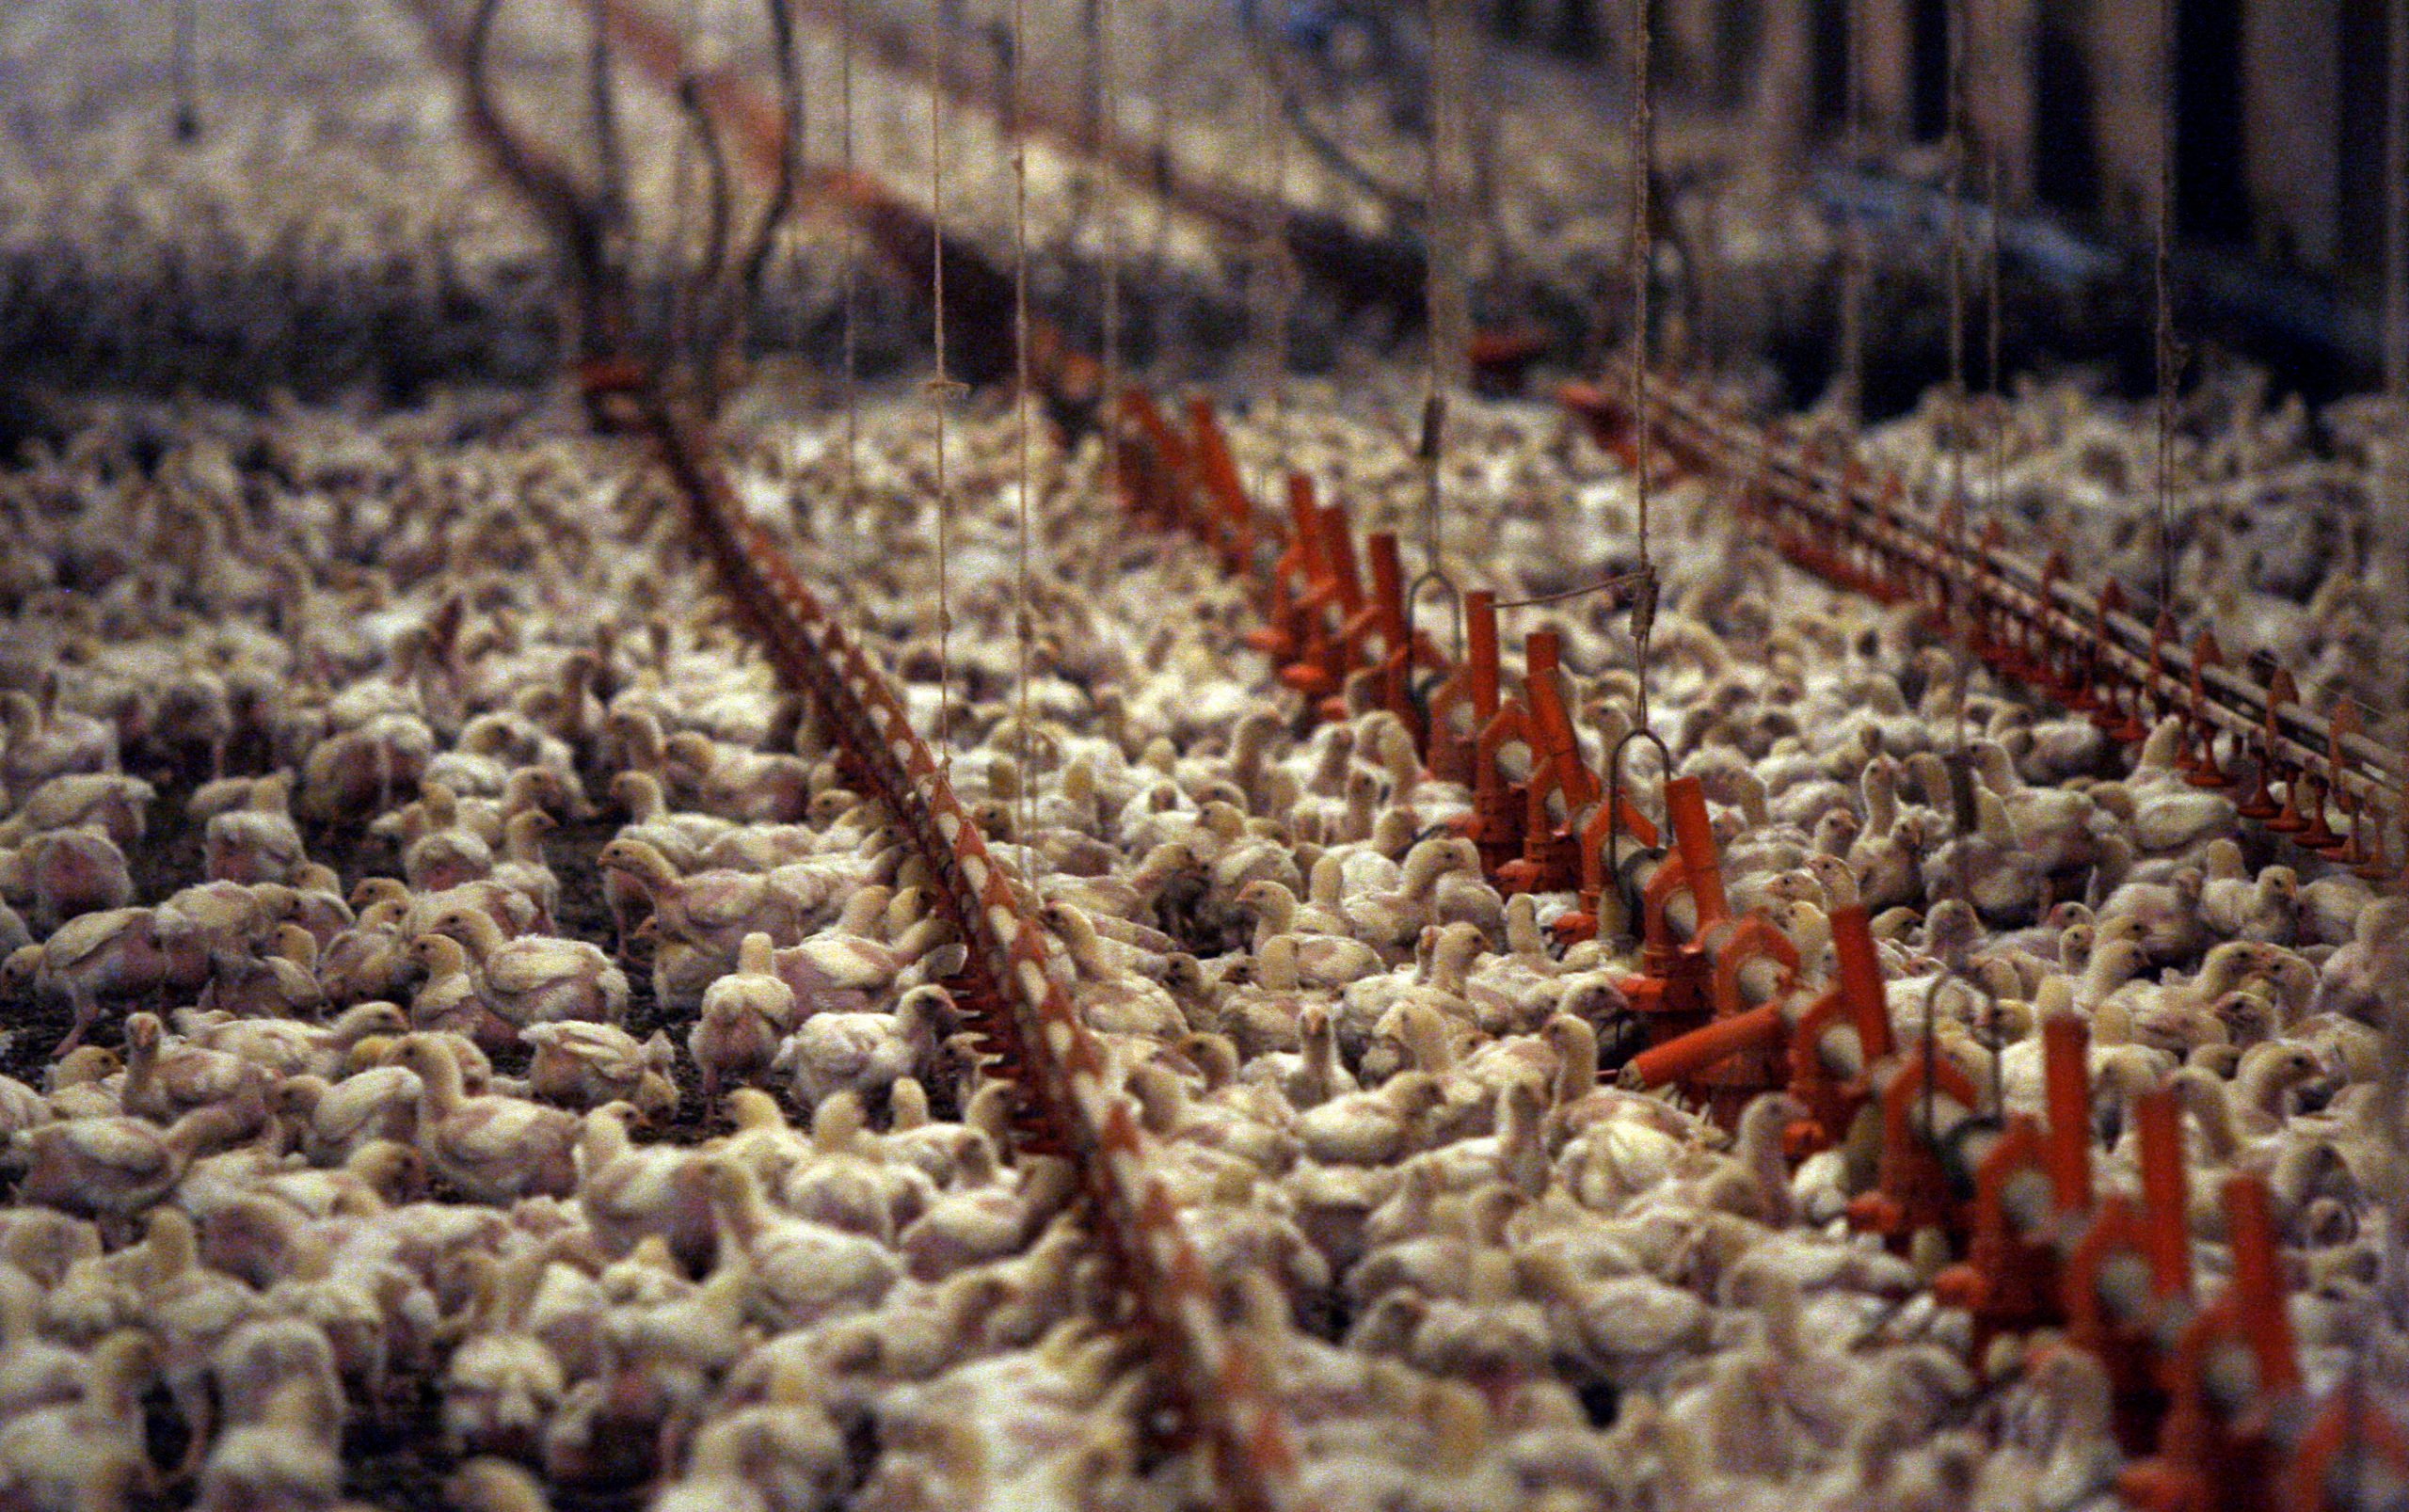 Chickens are crowded tightly together in an industrial chicken farm operated by Pilgrim's Pride.